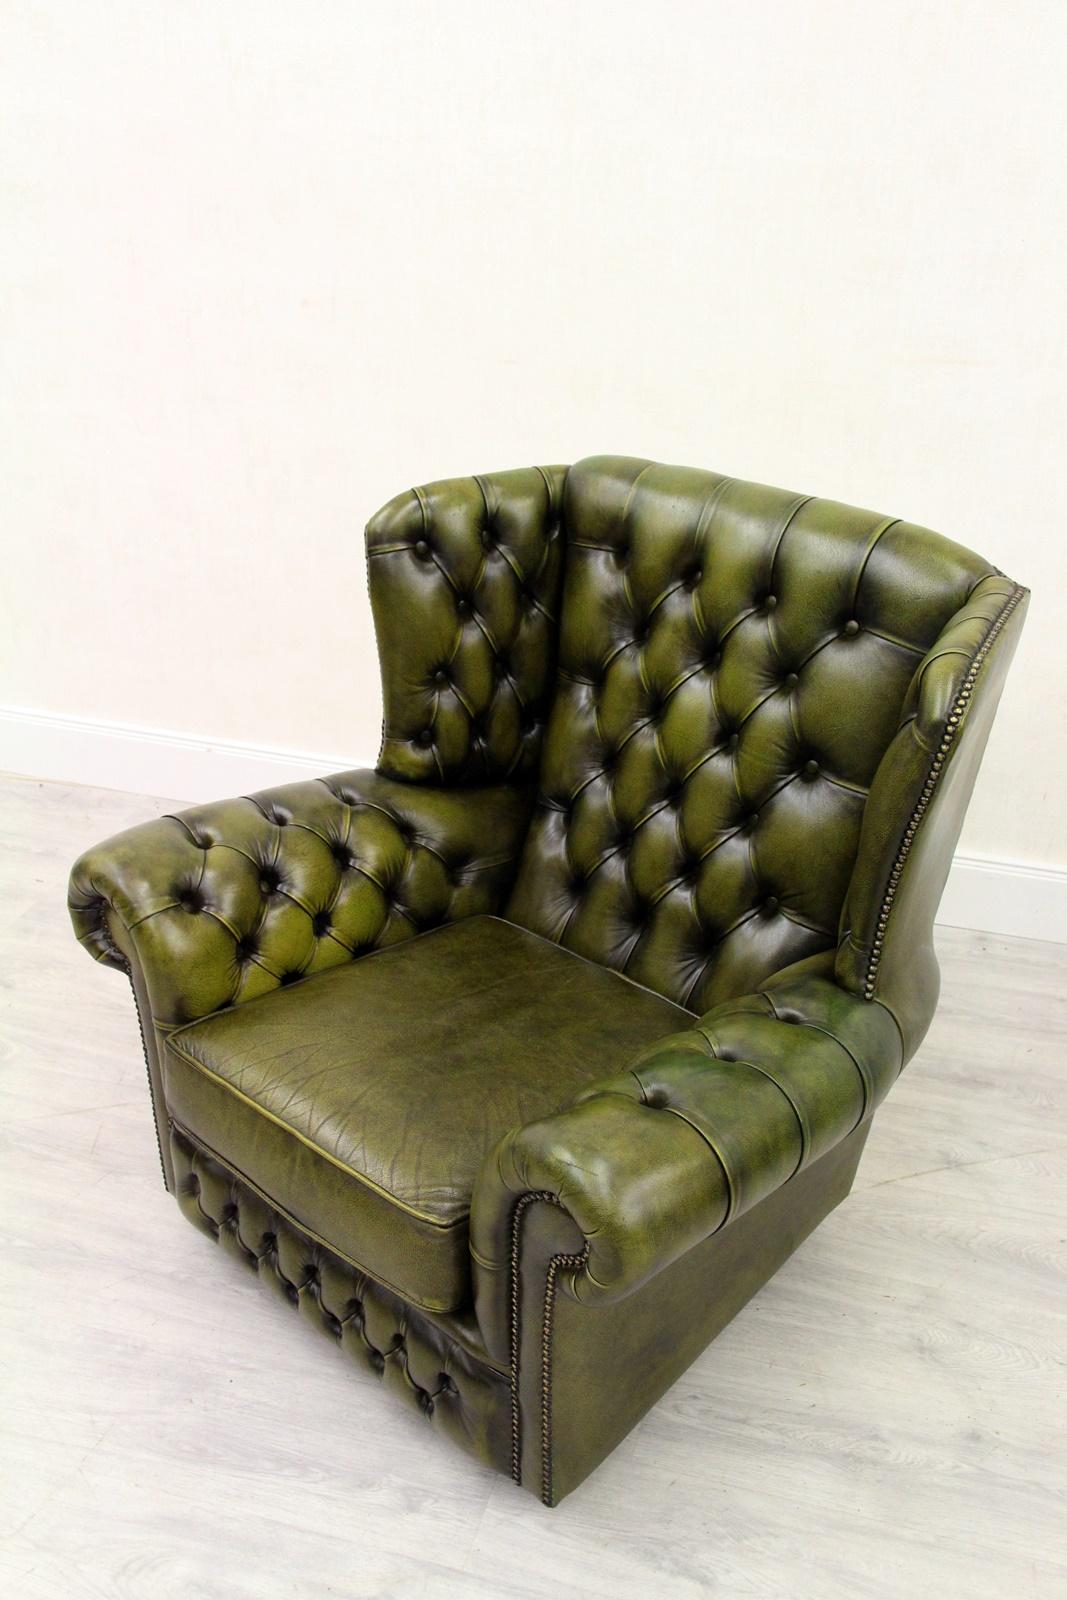 4 Chesterfield Chippendale Wing Chair Armchair Baroque Antique For Sale 3